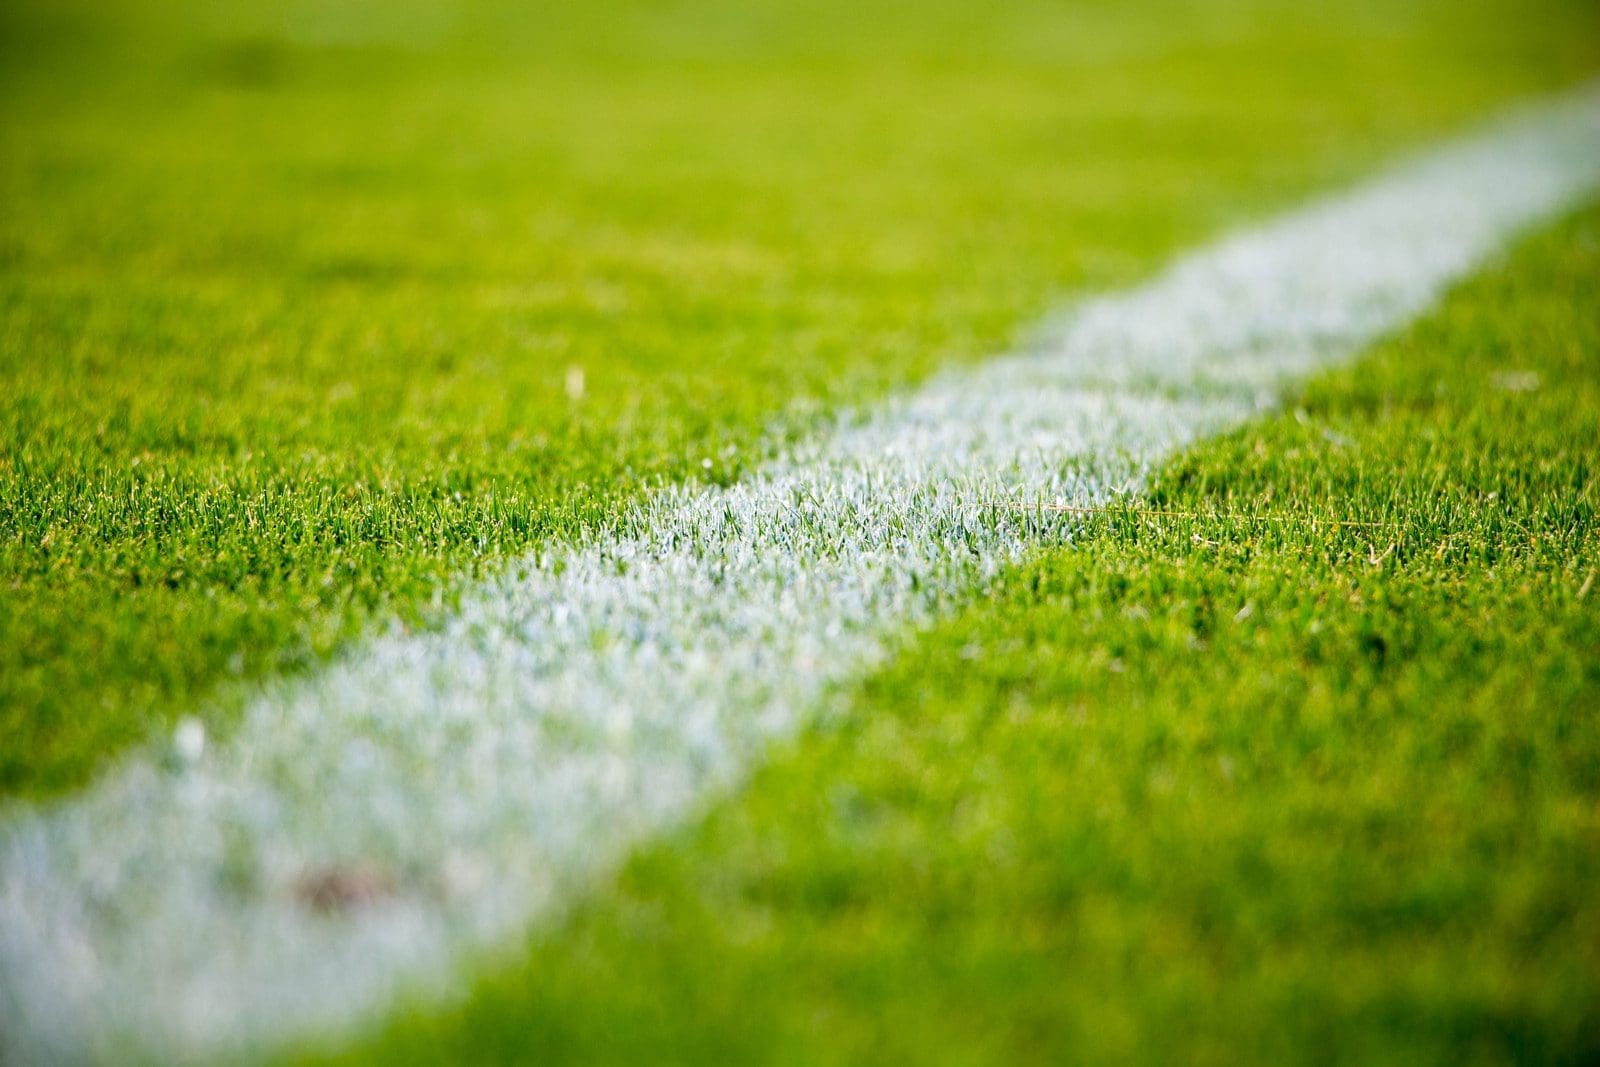 Close-up of a white line on green grass in a soccer field turf